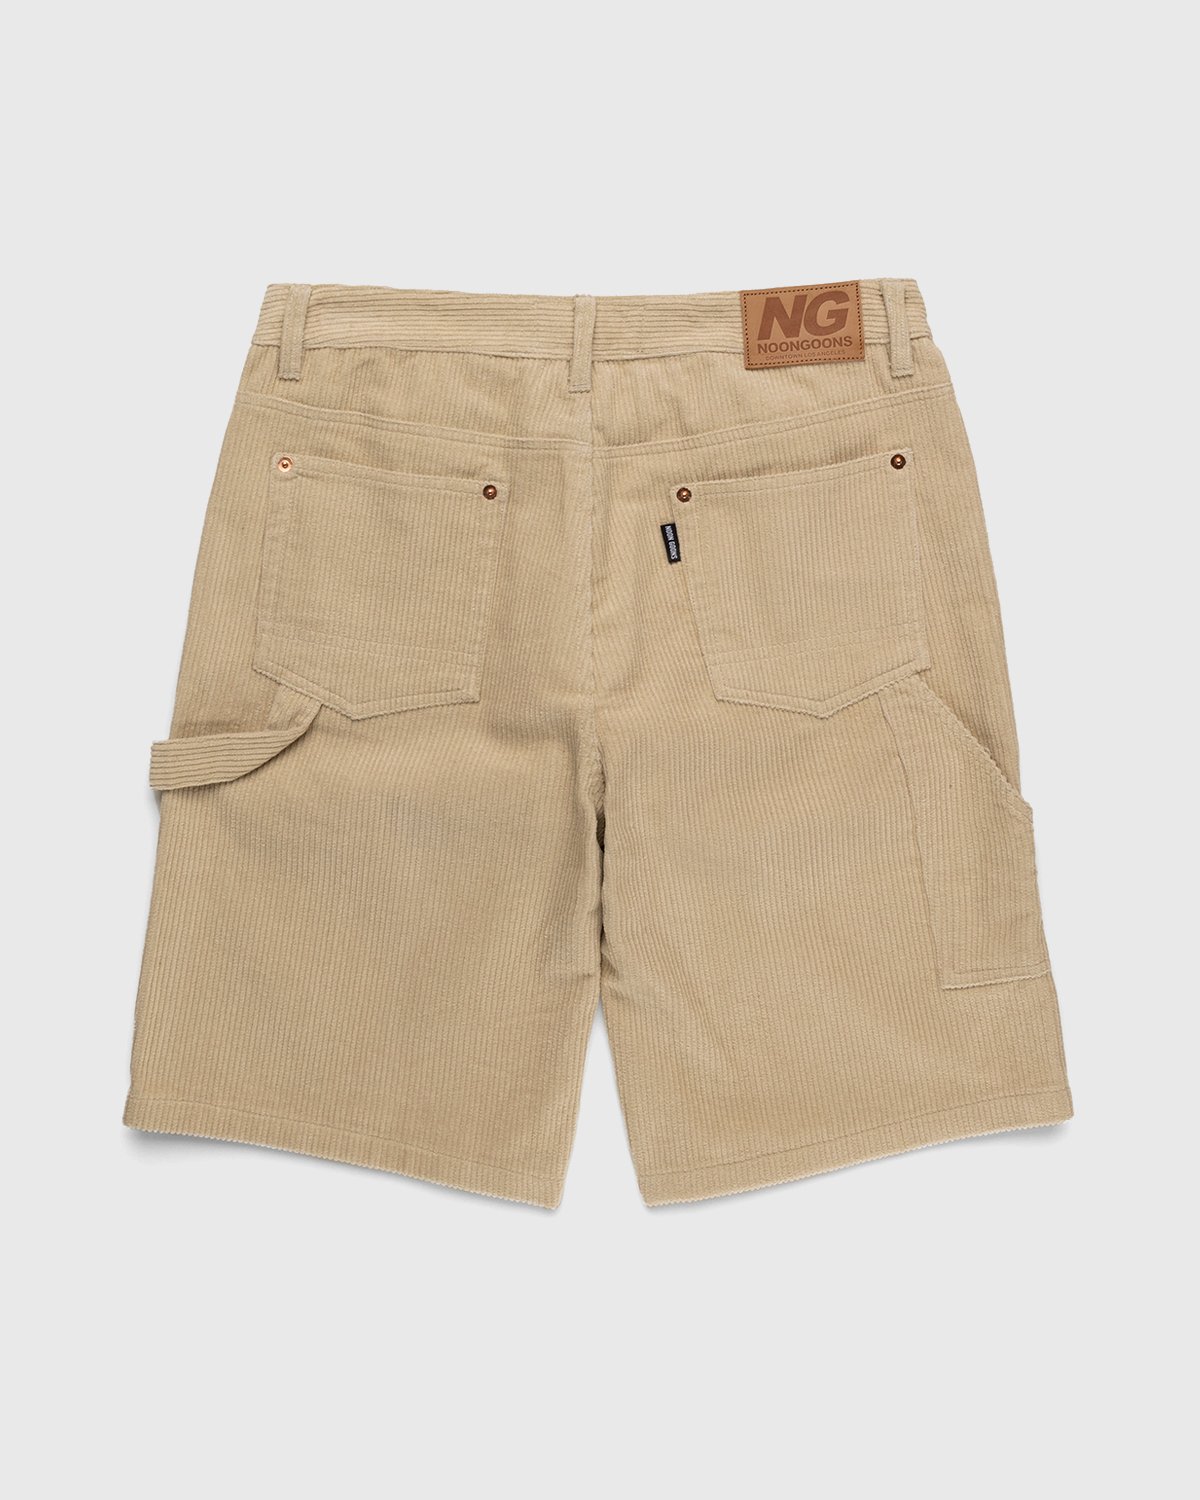 Noon Goons - Sublime Cord Short Overcast - Clothing - Beige - Image 2